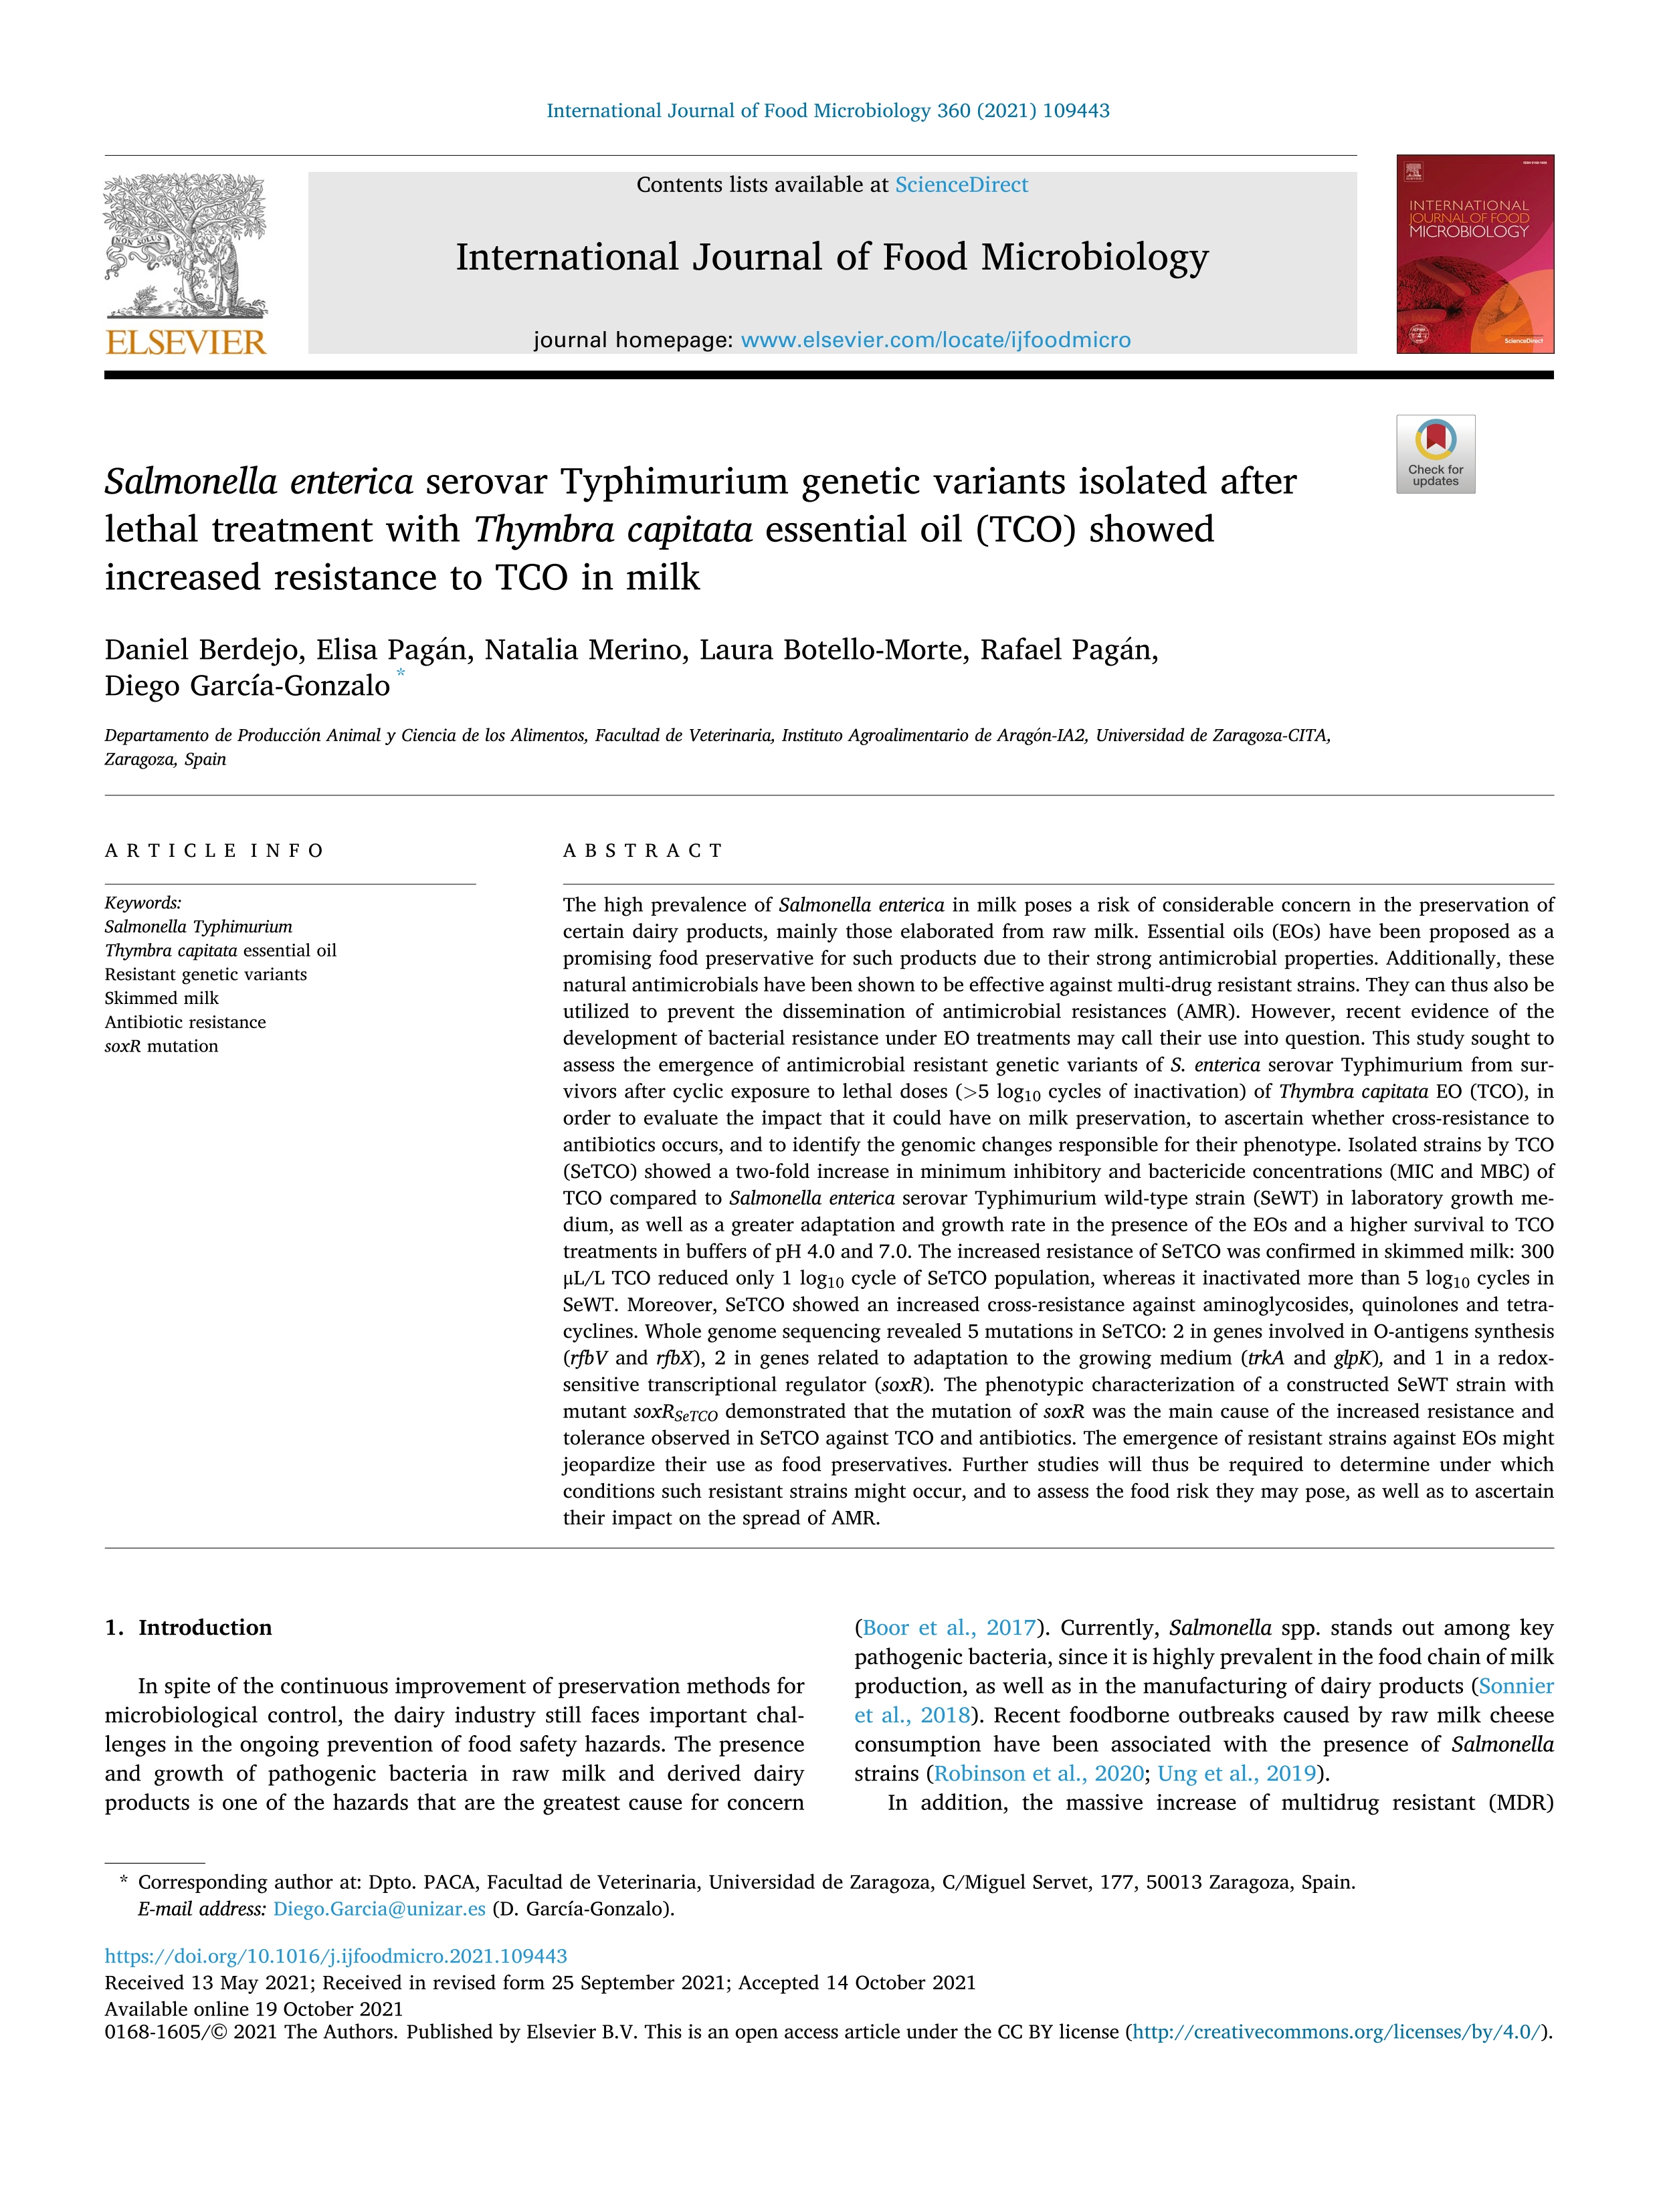 Salmonella enterica serovar Typhimurium genetic variants isolated after lethal treatment with Thymbra capitata essential oil (TCO) showed increased resistance to TCO in milk